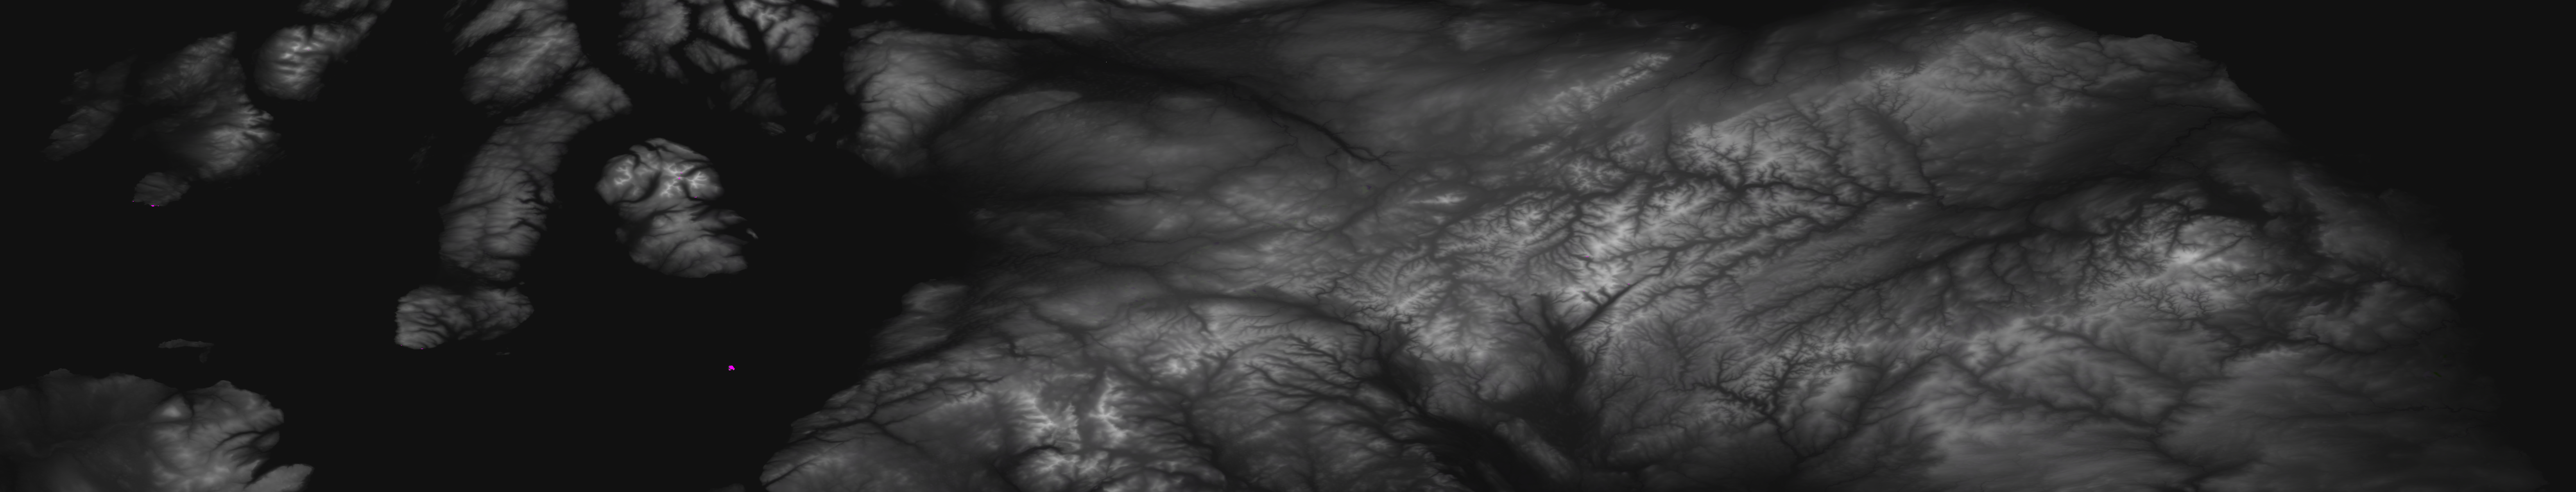 Greyscale comparison between SRTM and OS Terrain 50 across the UK at 55°N